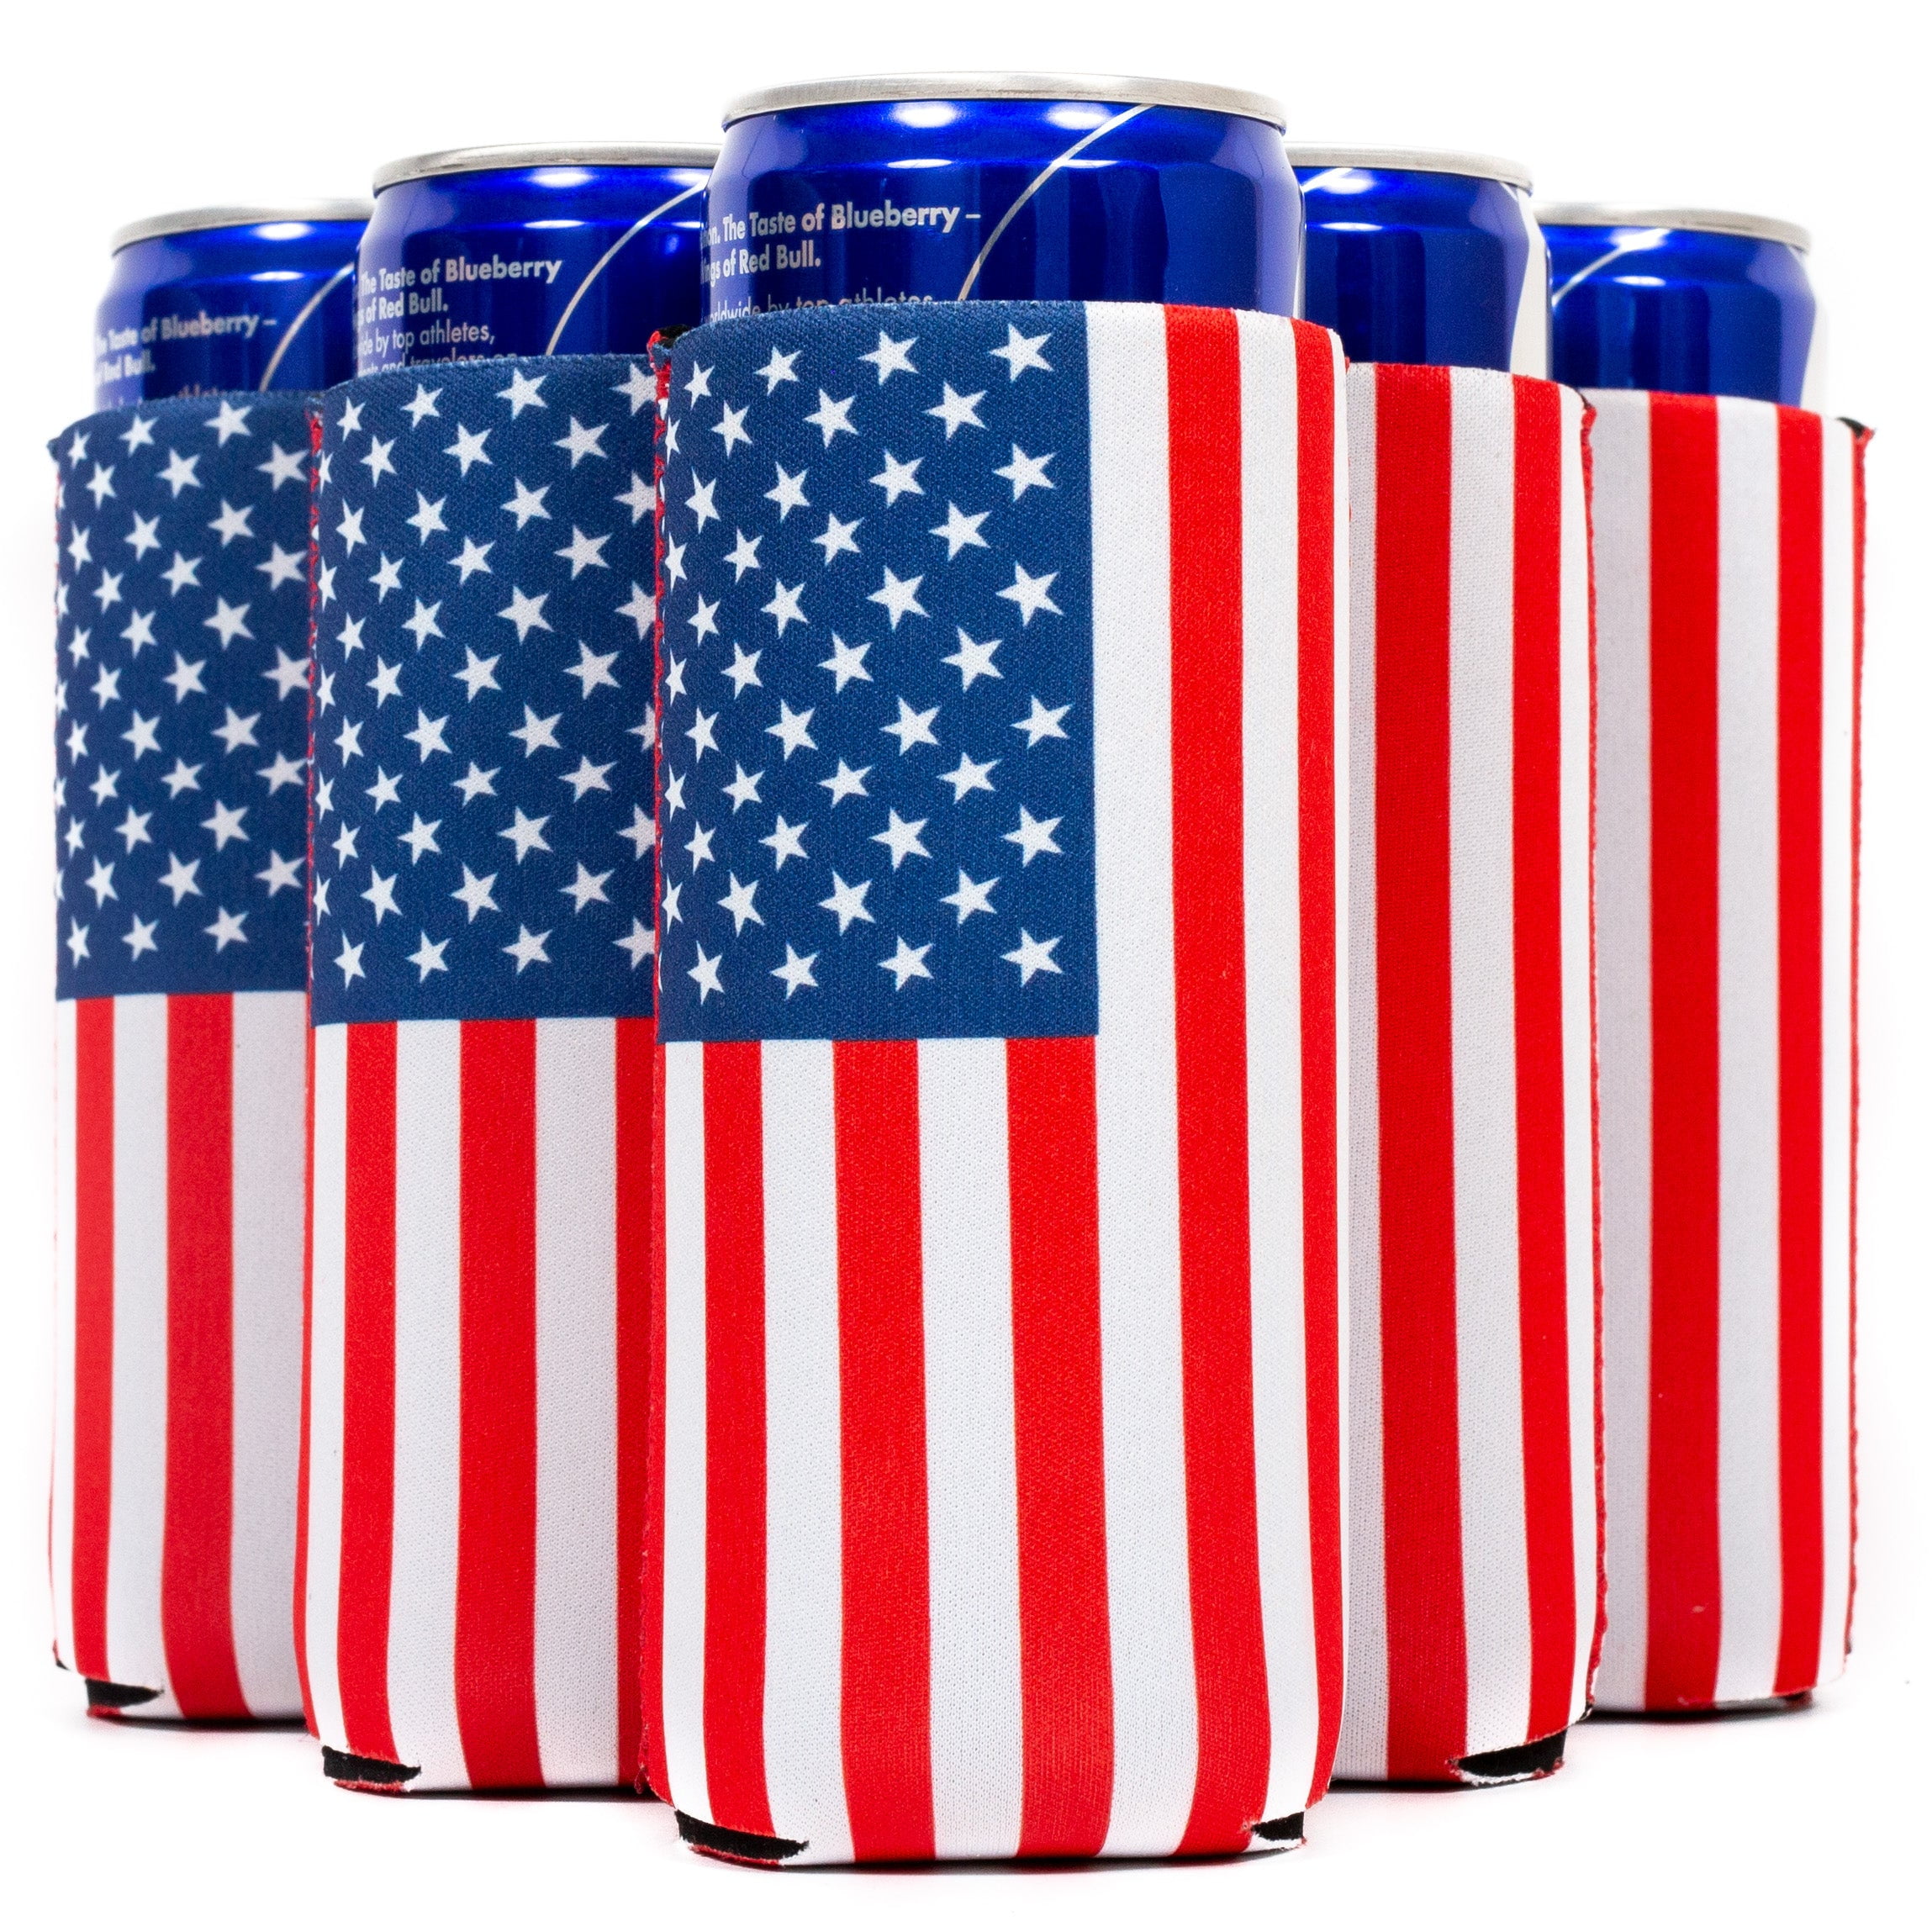 Sic Cups Slim Can Cooler American Flag